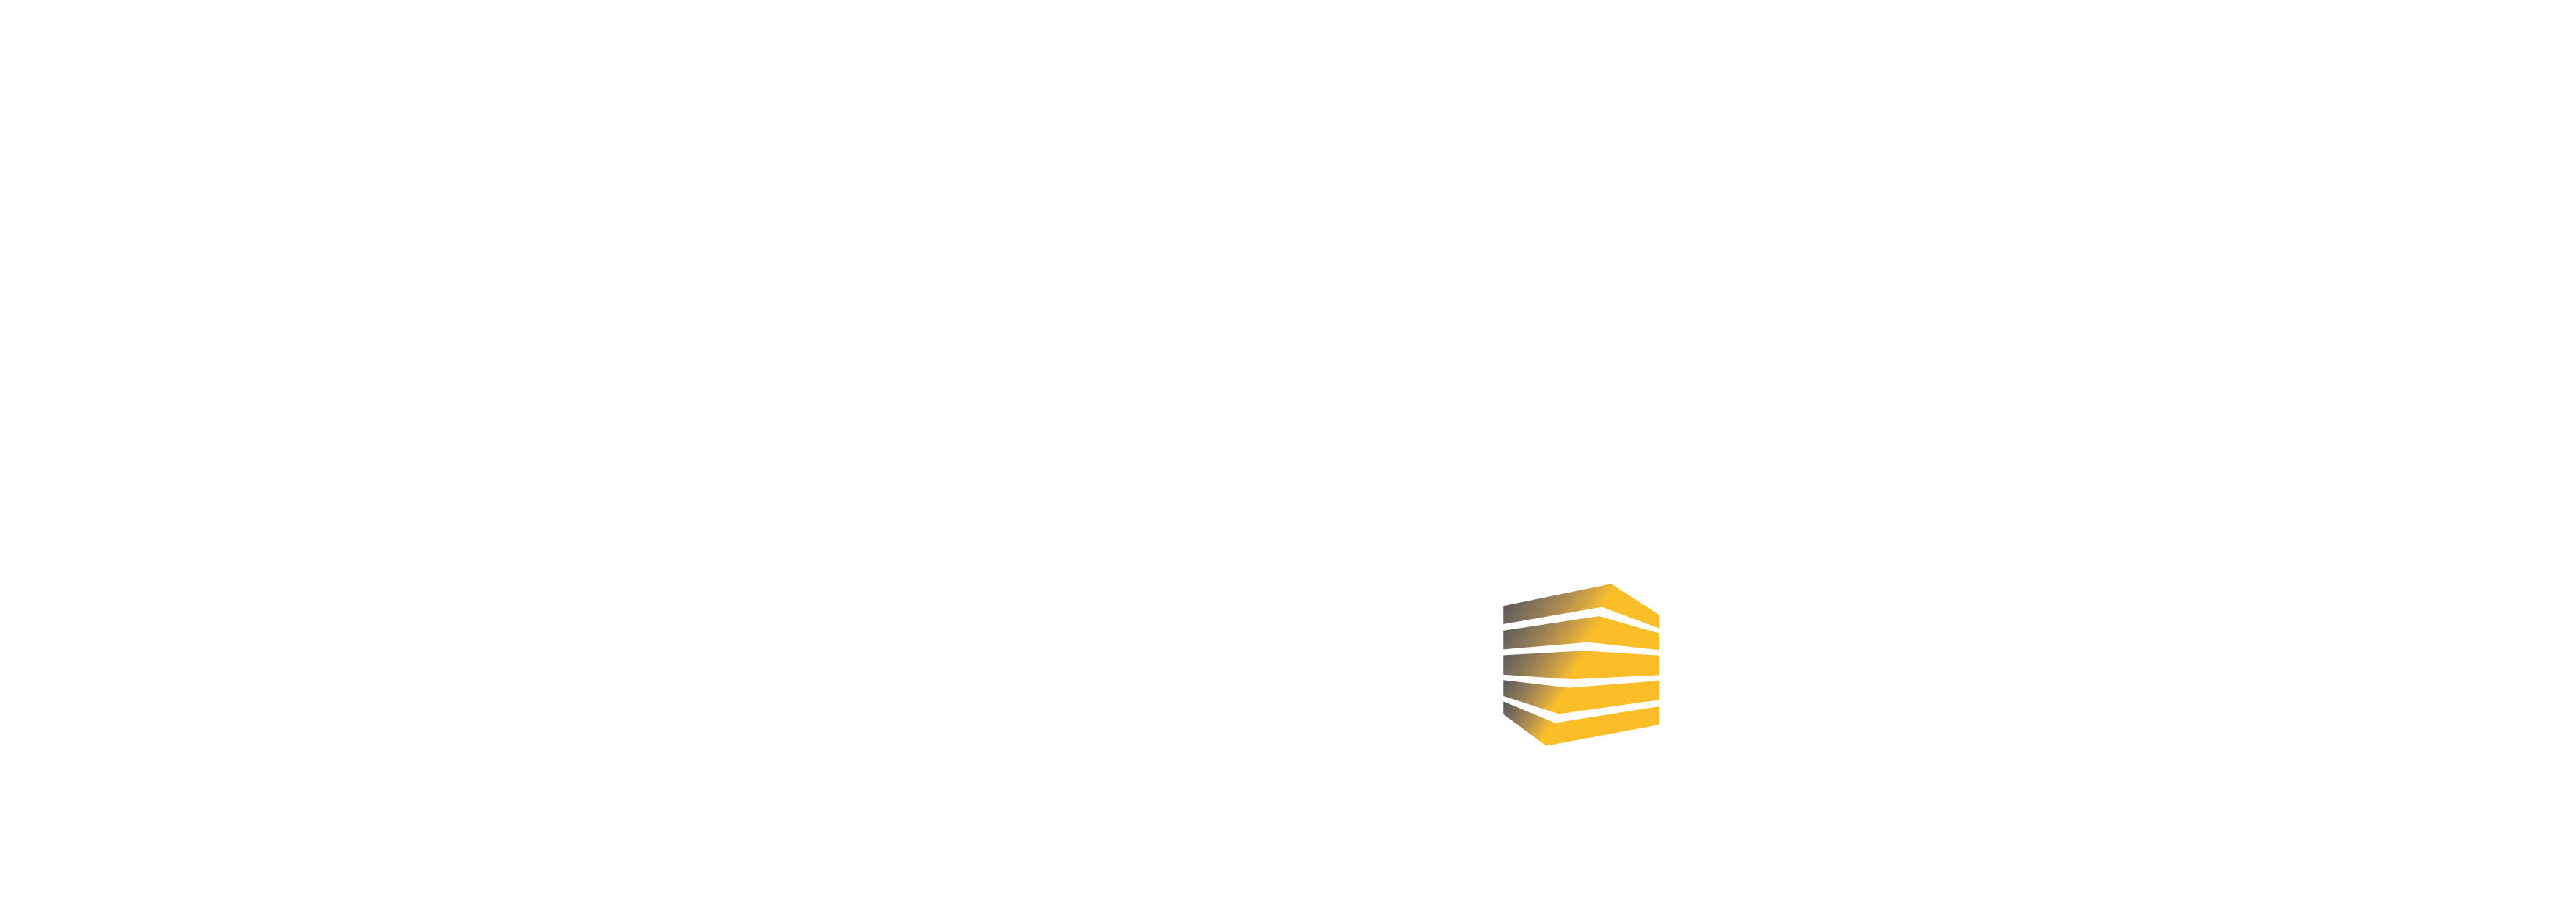 Powered by Retail Capital